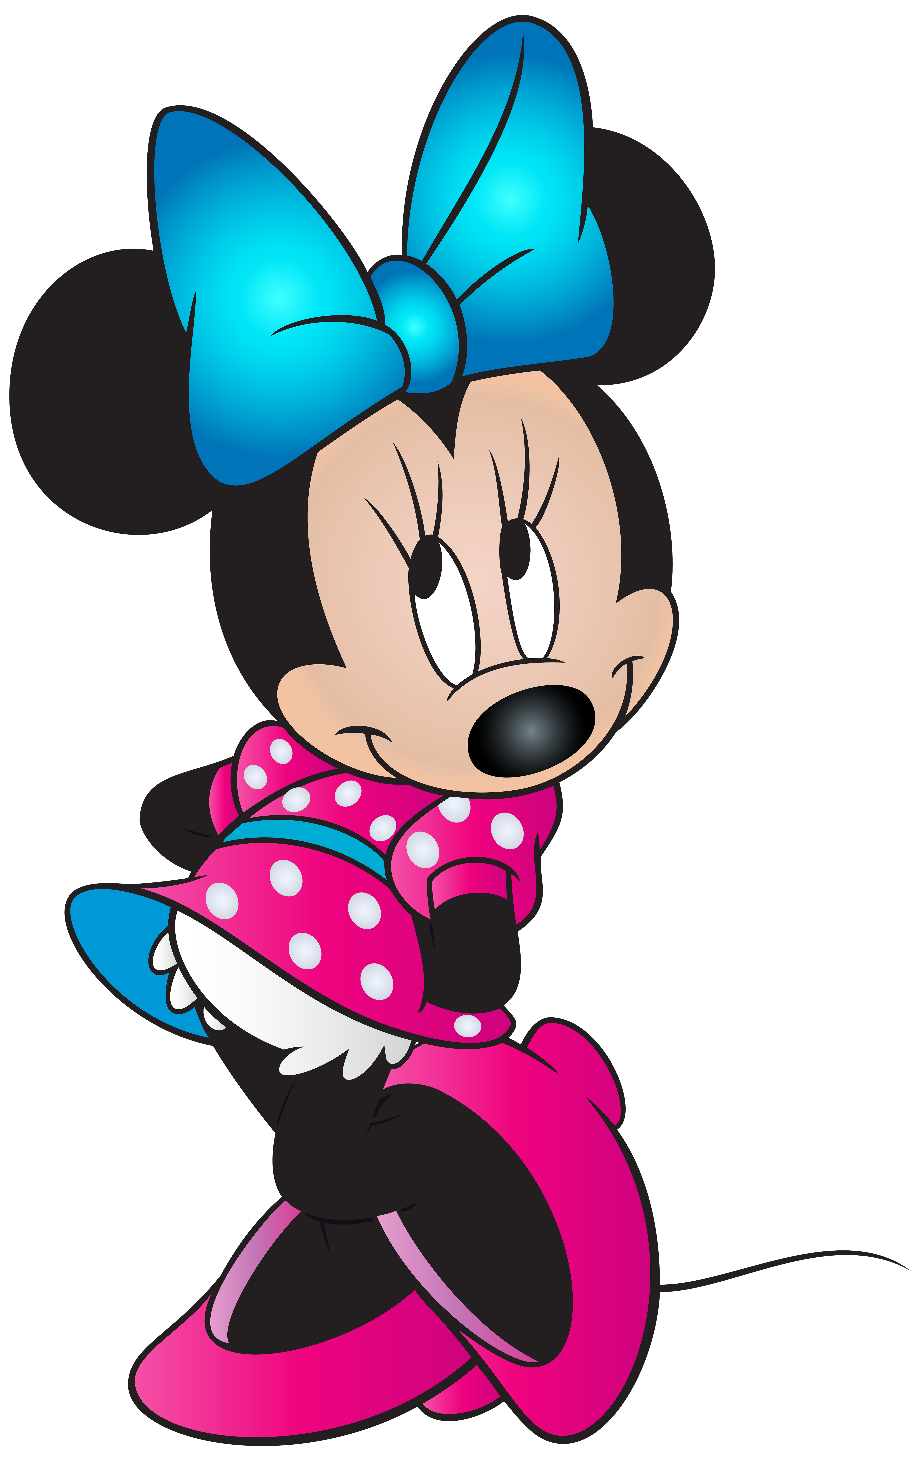 Download High Quality minnie mouse clipart high resolution Transparent